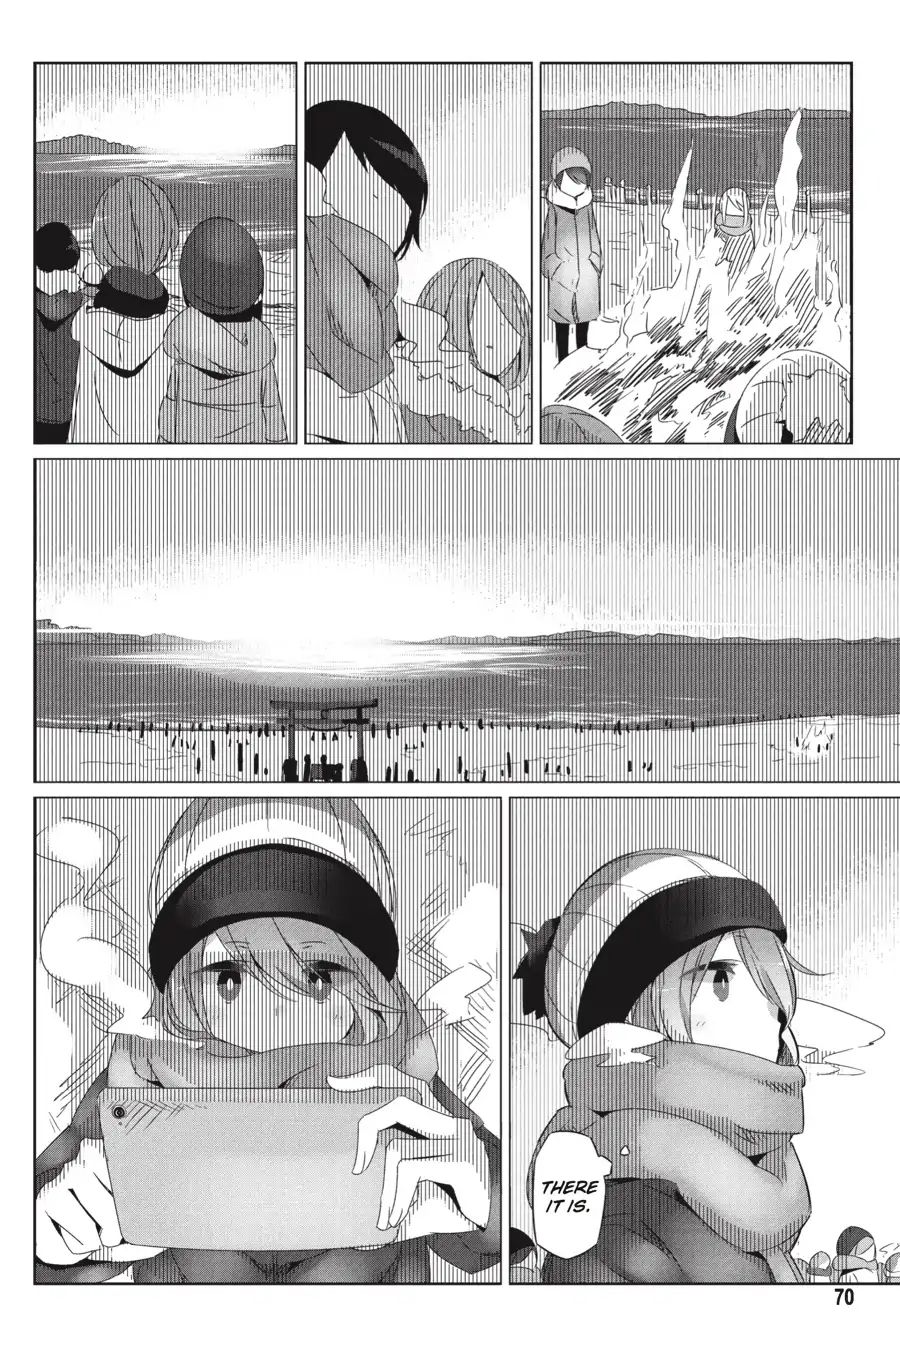 Yurucamp Vol.5 Chapter 26: The Beginning of the Year